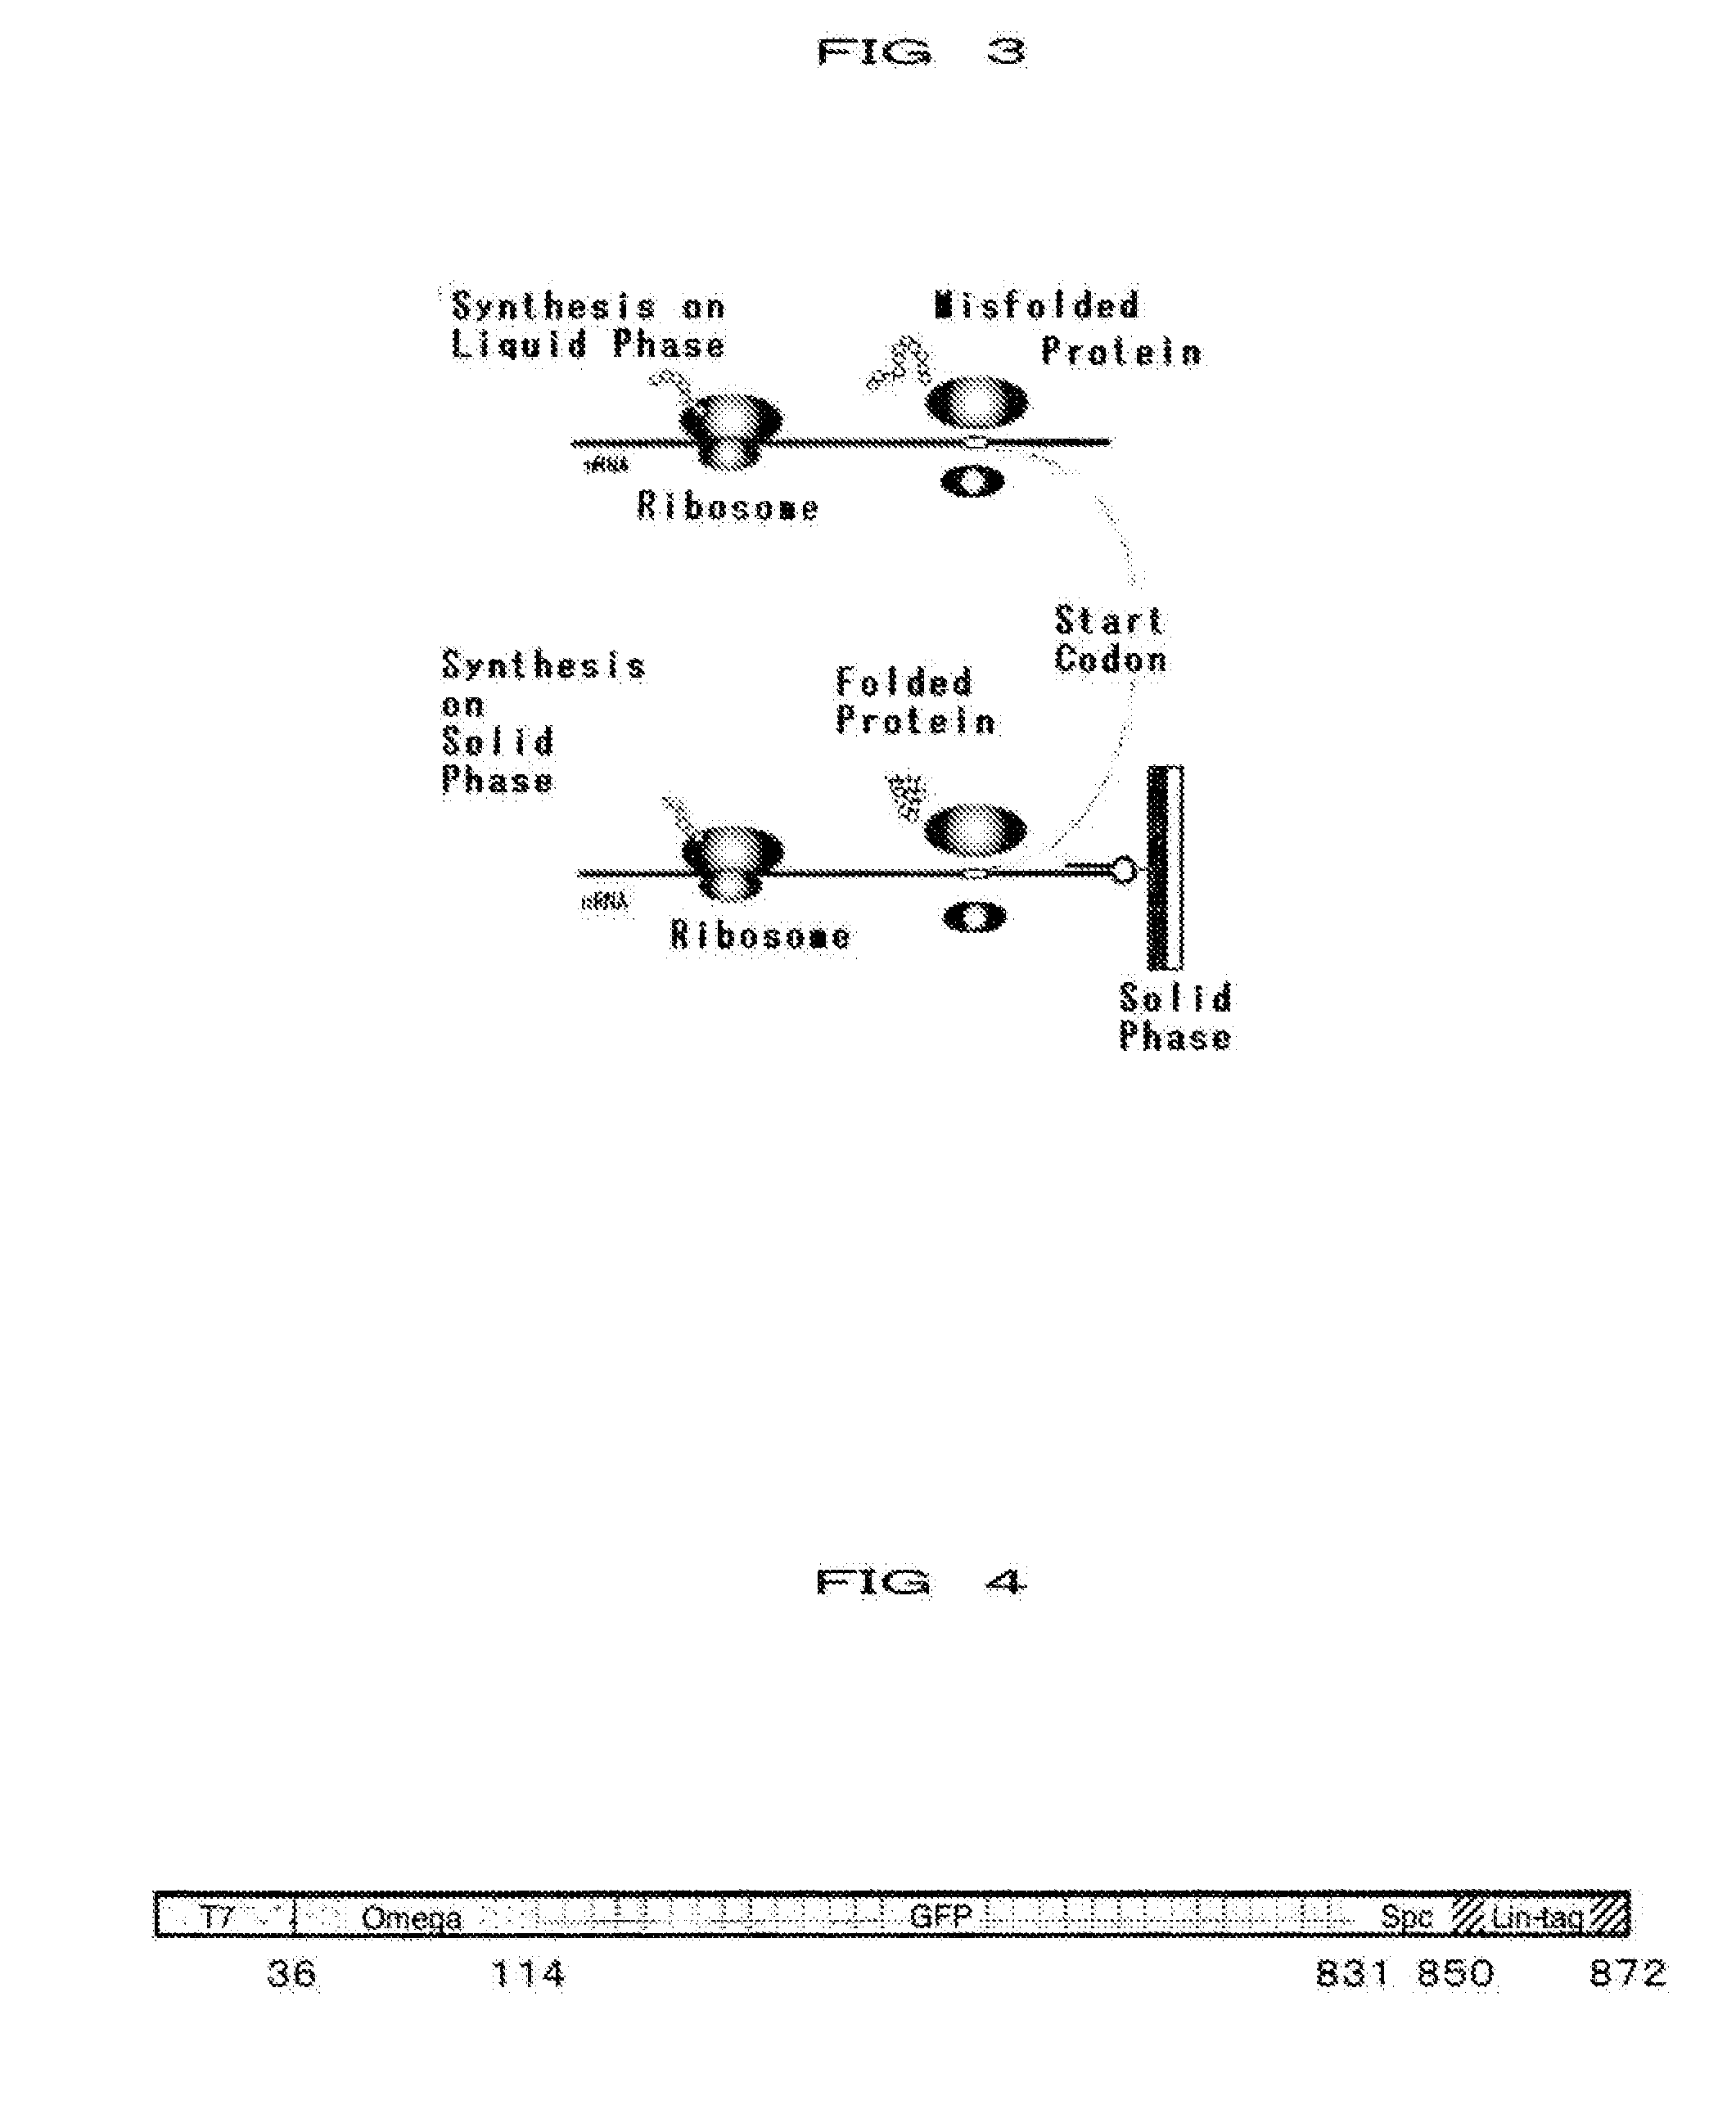 Method of Synthesizing Protein, mRna Immobilized on Solid Phase and Apparatus for Synthesizing Protein